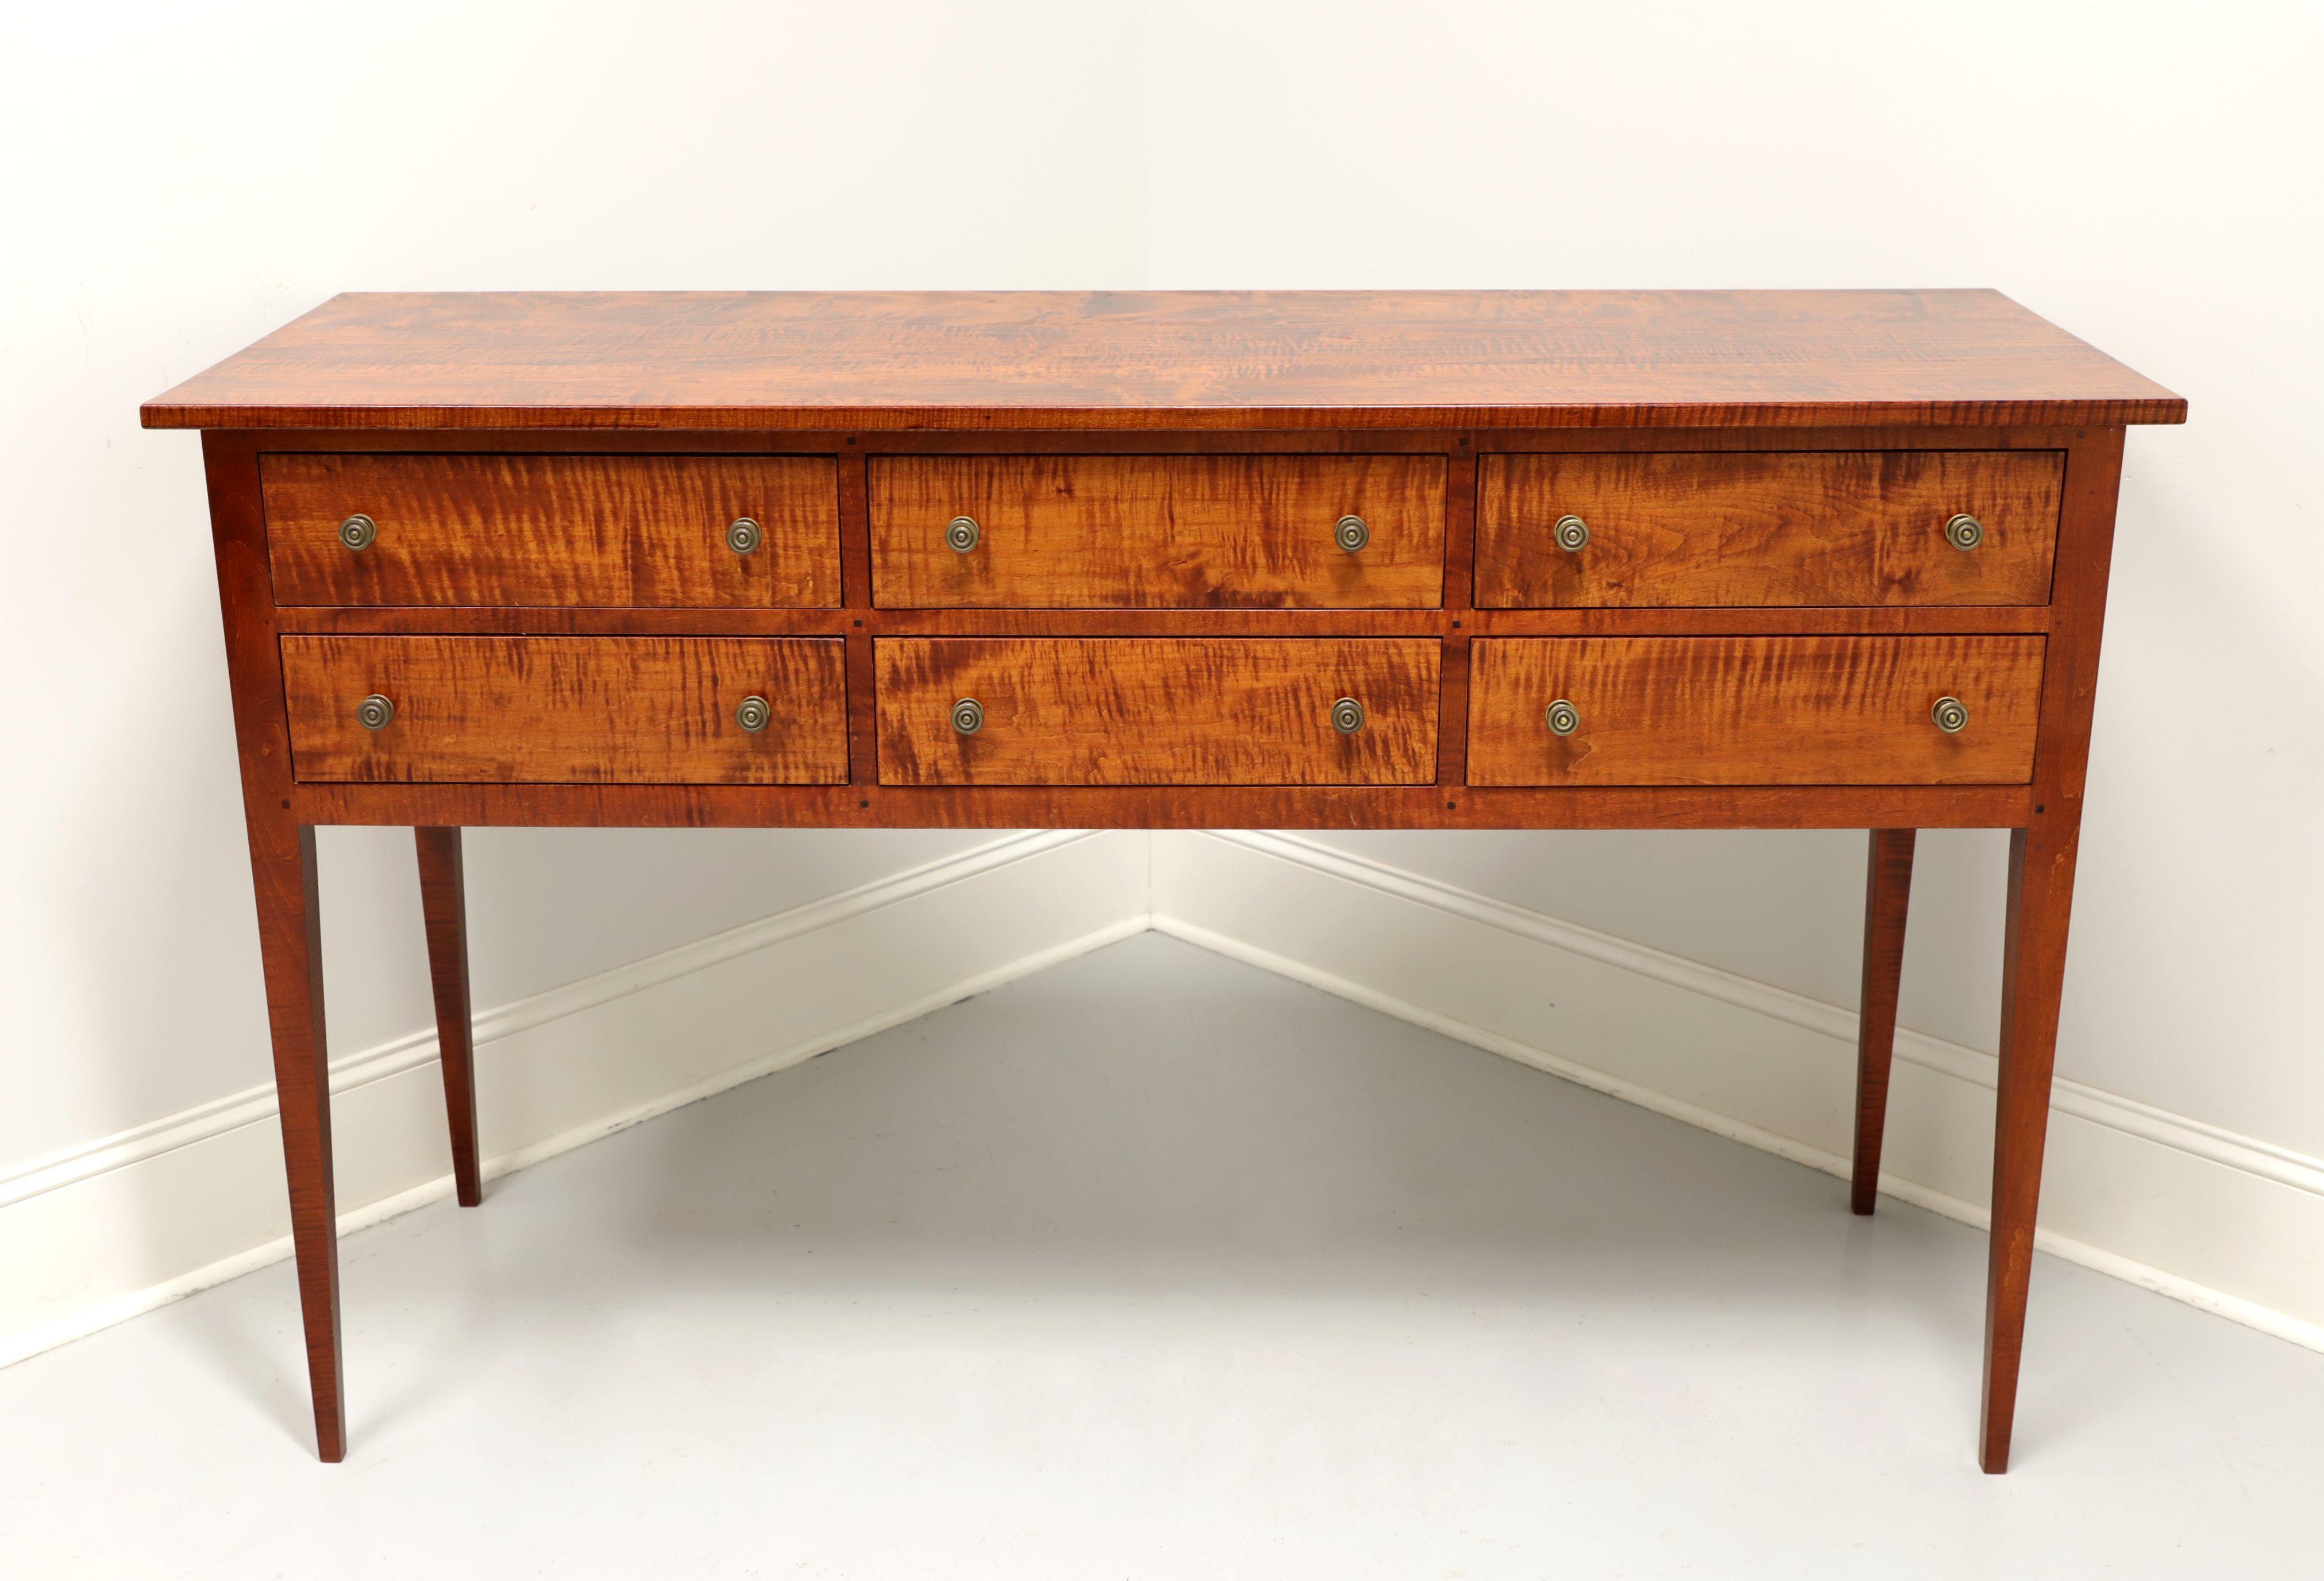 A Traditional style huntboard by JL Treharn. Solid tiger maple with brass hardware and straight tapered legs. Features six drawers of dovetail construction. Made in Ohio, USA, in the late 20th Century.

Measures: 63.5 W 22 D 39 H

Excellent